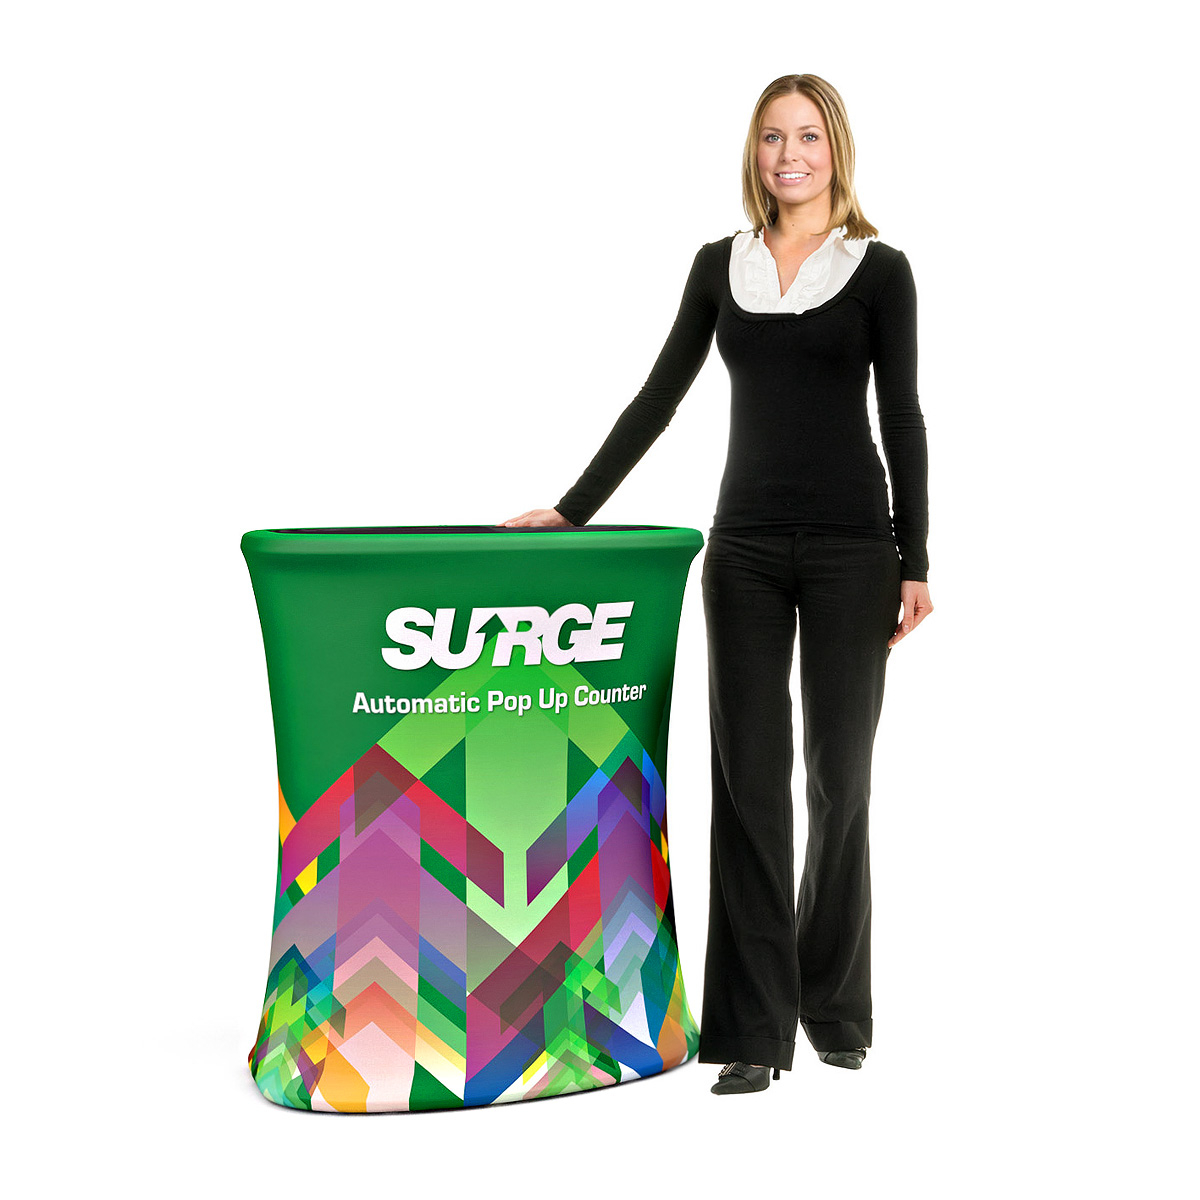 SURGE® Pop Up Counter is an Automatic Rising Promotional Counter Display. Gently Lift the Podium Countertop and it Automatically Rises in Seconds - With Textile Graphics Installed. Includes Custom Printed Tension Fabric Graphics and Premium Carry Case.